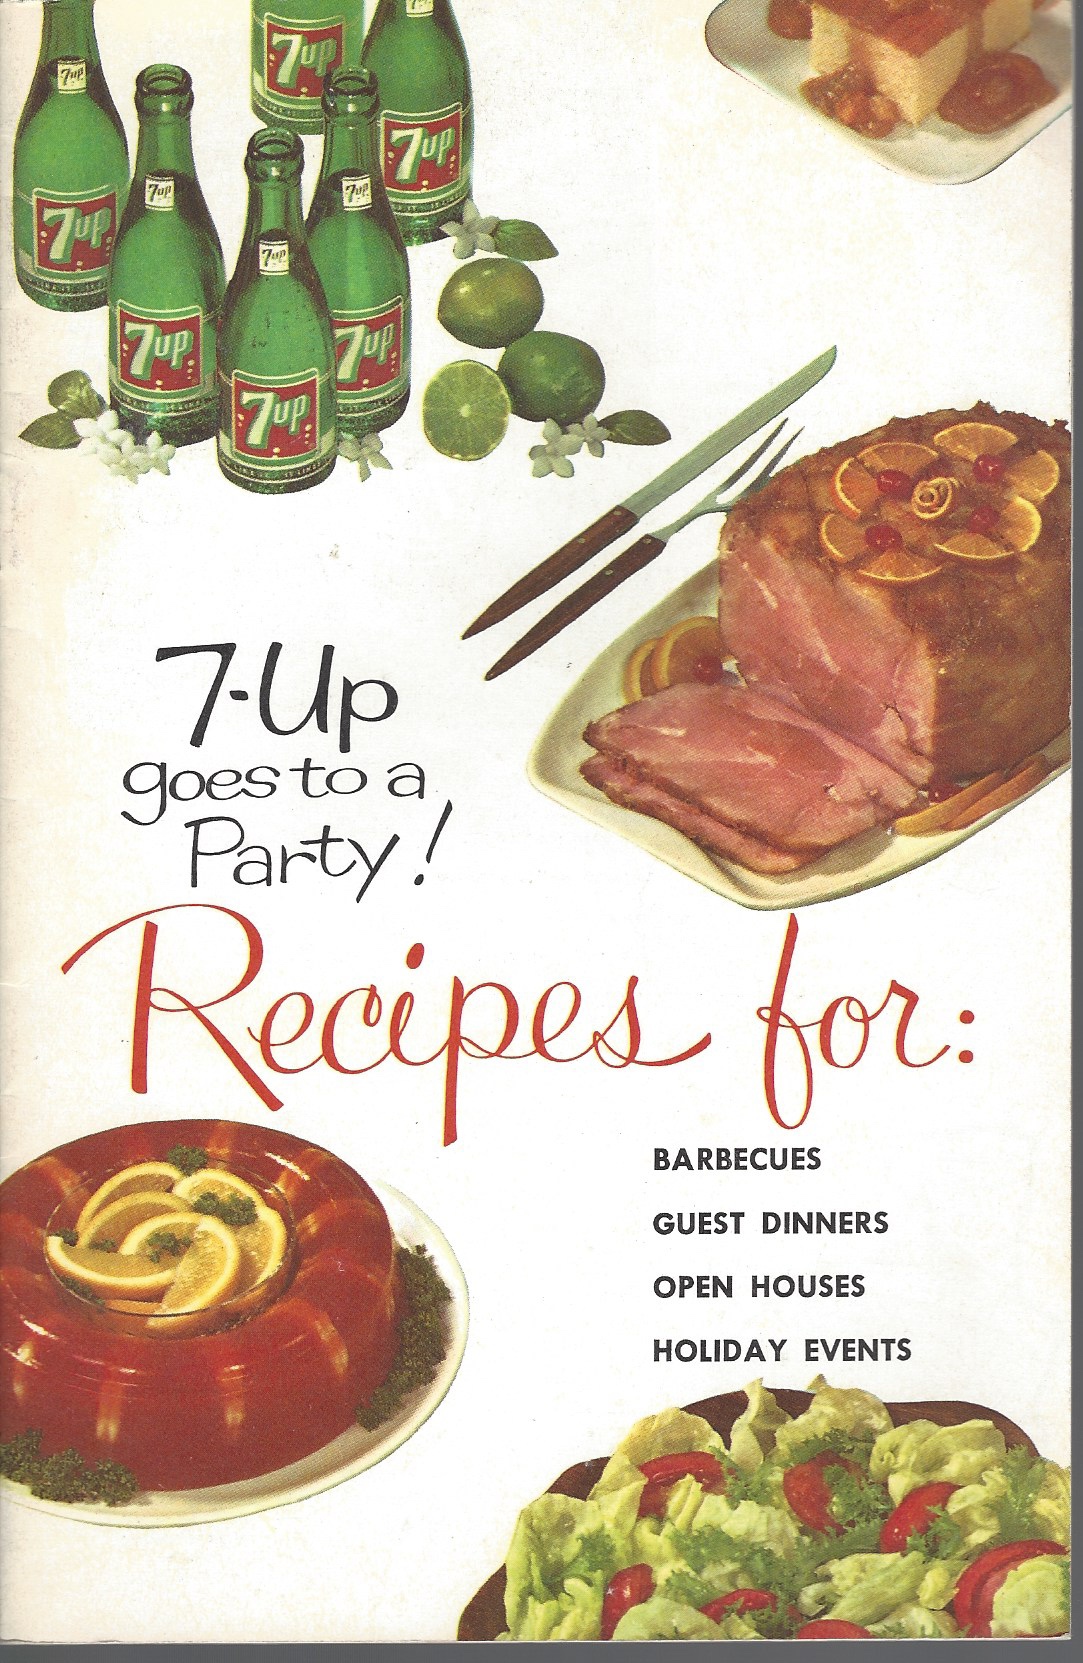 SEVEN-UP COMPANY, THE - 7-Up Goes to a Party Recipes for Barbecues, Guest Dinners, Open Houses, Holiday Events Vintage